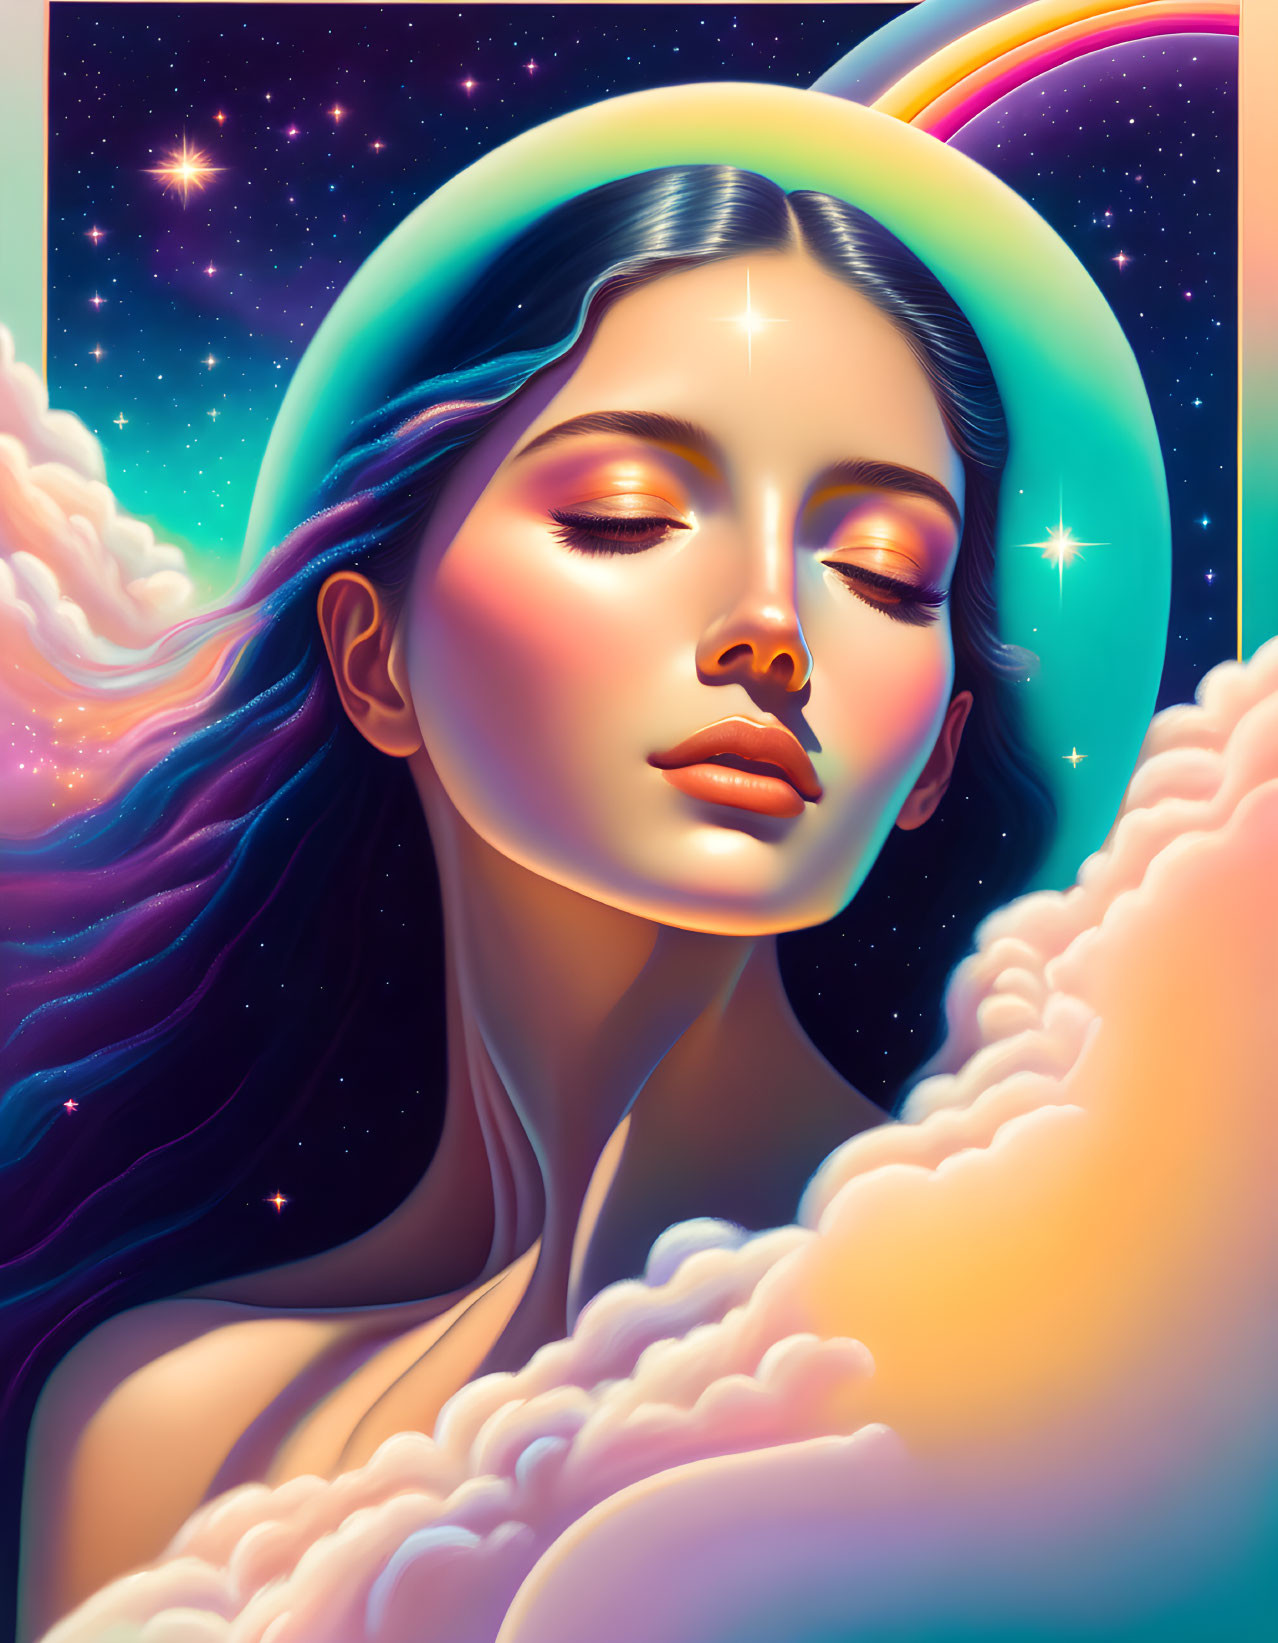 Cosmic portrait of serene woman with radiant stars and colorful clouds